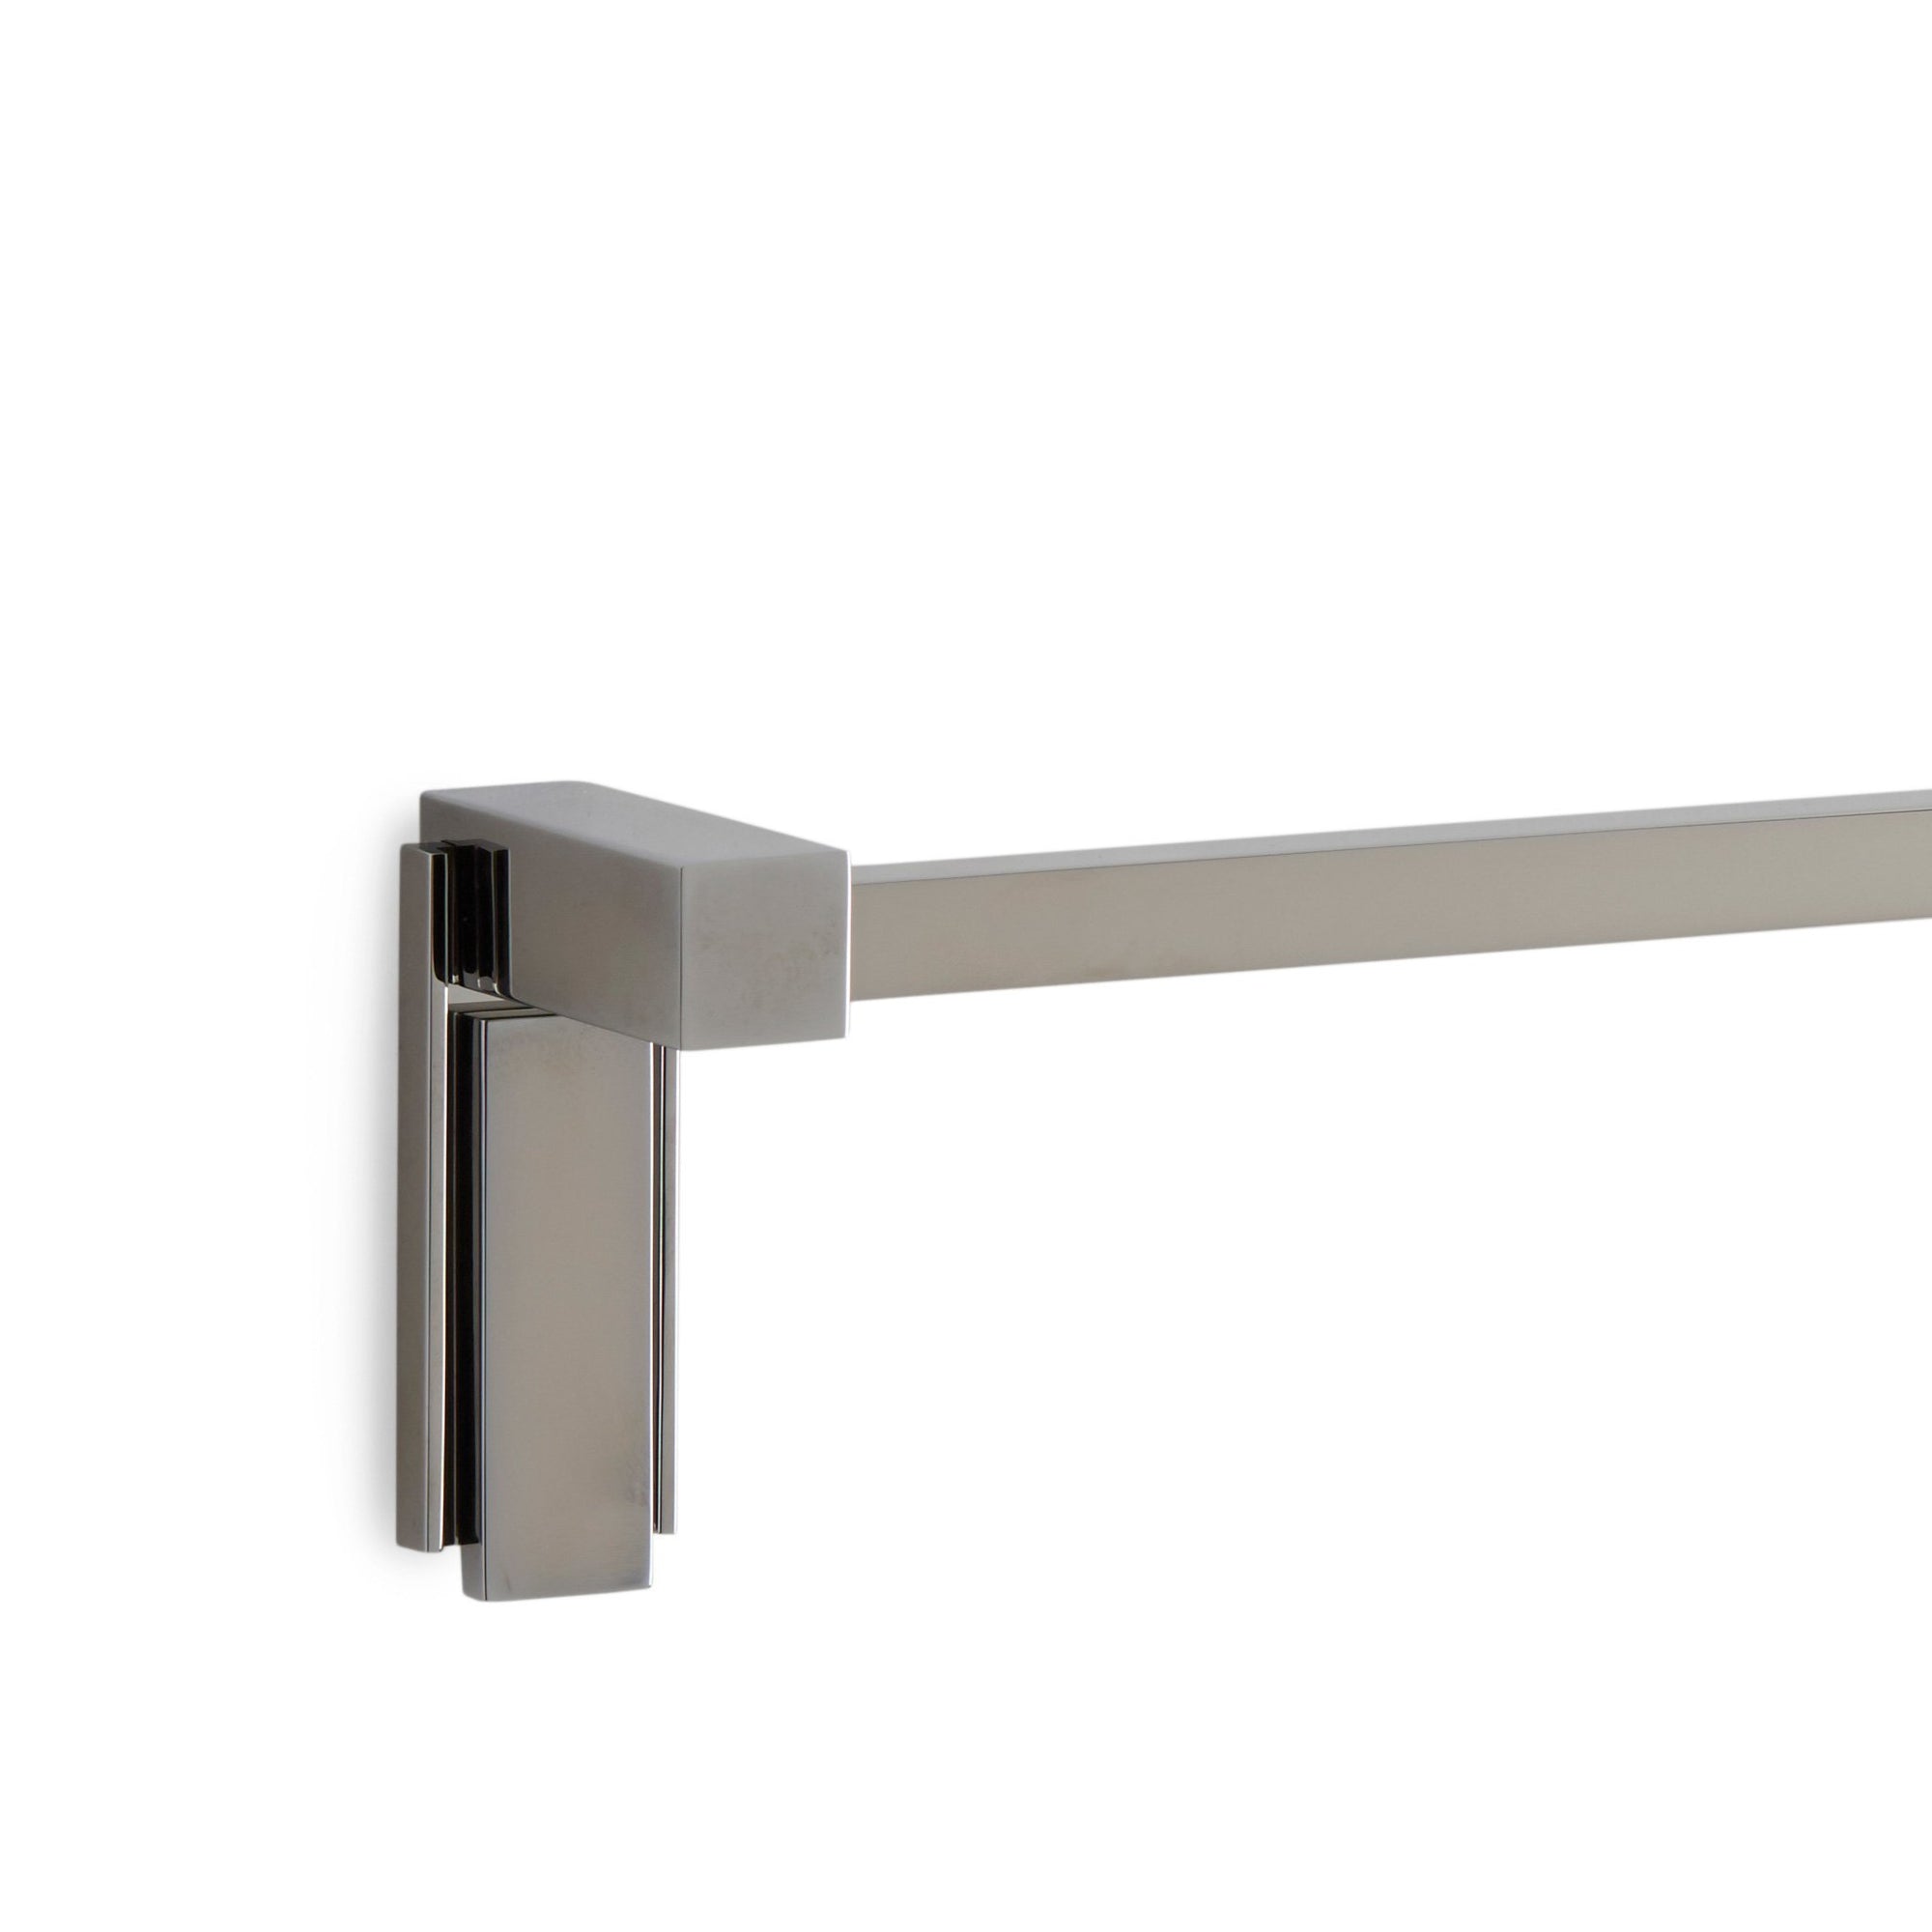 3678-MLIN-30SQ-CP Sherle Wagner International Apollo Towel Bar with Metal insert in Polished Chrome metal finish